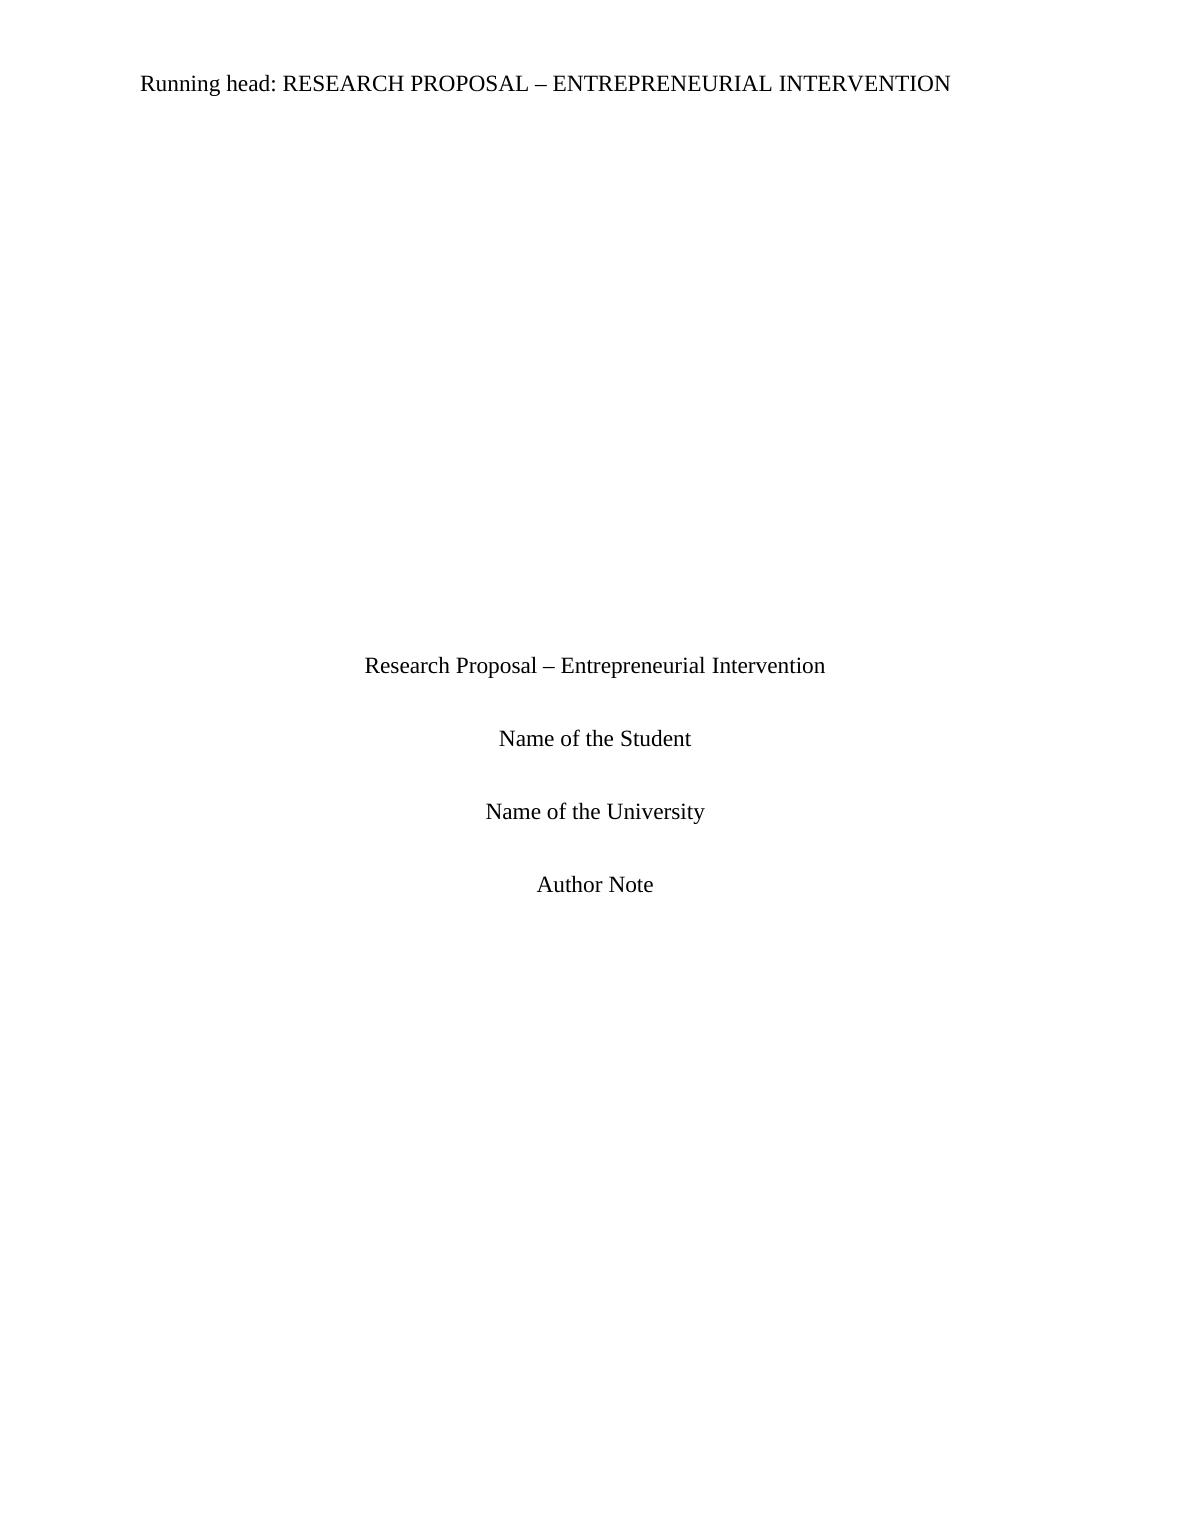 Research Proposal - Entrepreneurial Intervention_1